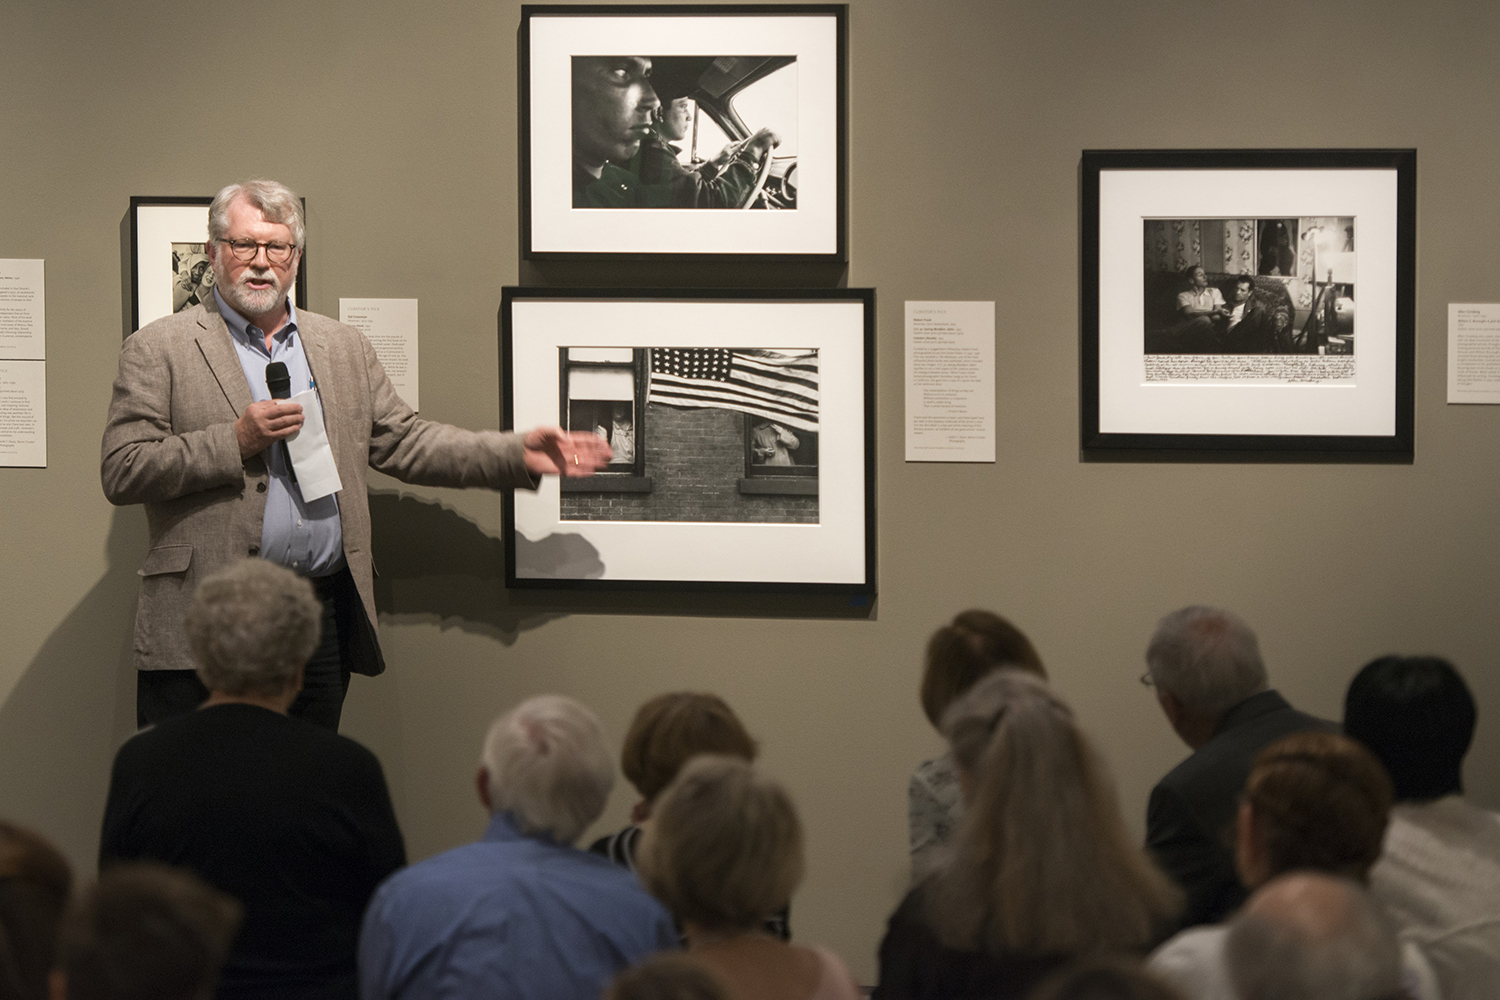 The Society of Fellows Gallery Jam event with Keith Davis, Rachel Kozad and Glenn North, on May 10, 2018 at The Nelson-Atkins Museum of Art in Kansas City, MO. Nelson-Atkins Media Services Photographer / Chris Crum